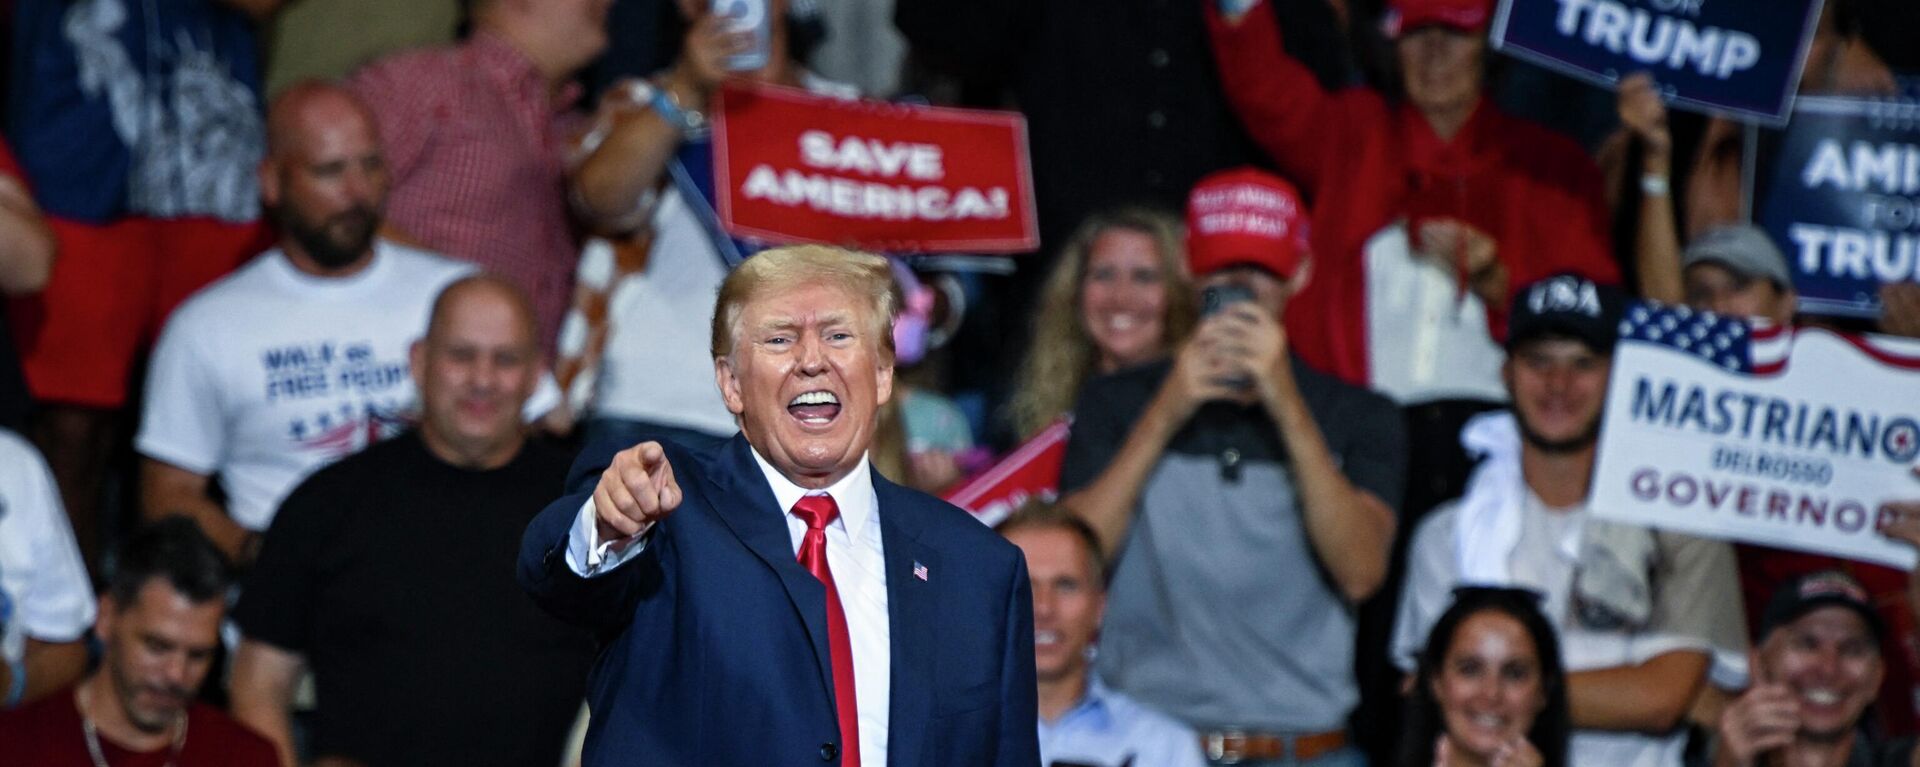 (FILES) In this file photo taken on September 03, 2022, former US President Donald Trump speaks during a campaign rally in support of Doug Mastriano for Governor of Pennsylvania and Mehmet Oz for US Senate at Mohegan Sun Arena in Wilkes-Barre, Pennsylvania. - Sputnik International, 1920, 07.09.2022